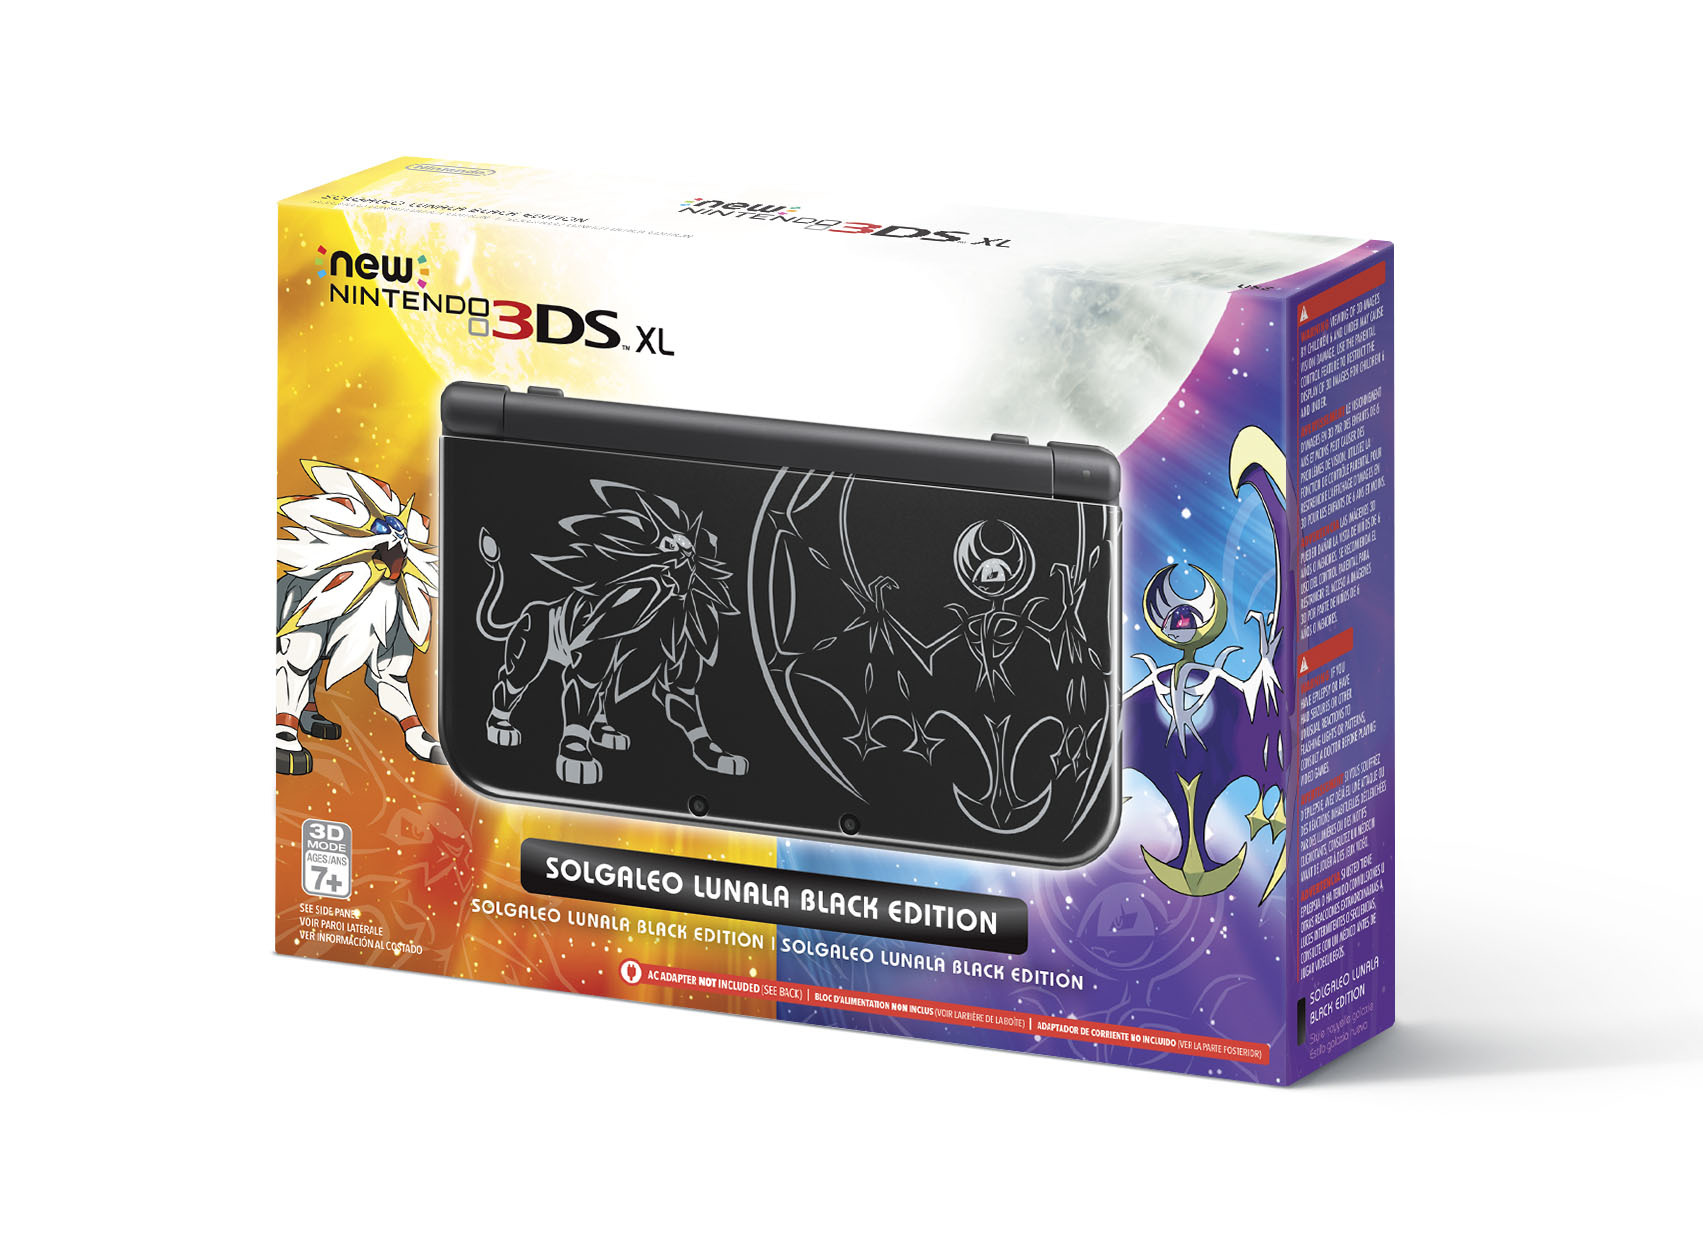 New Nintendo 3DS System Inspired by Pokémon Games Arrives in Stores Oct. 28 | Business Wire